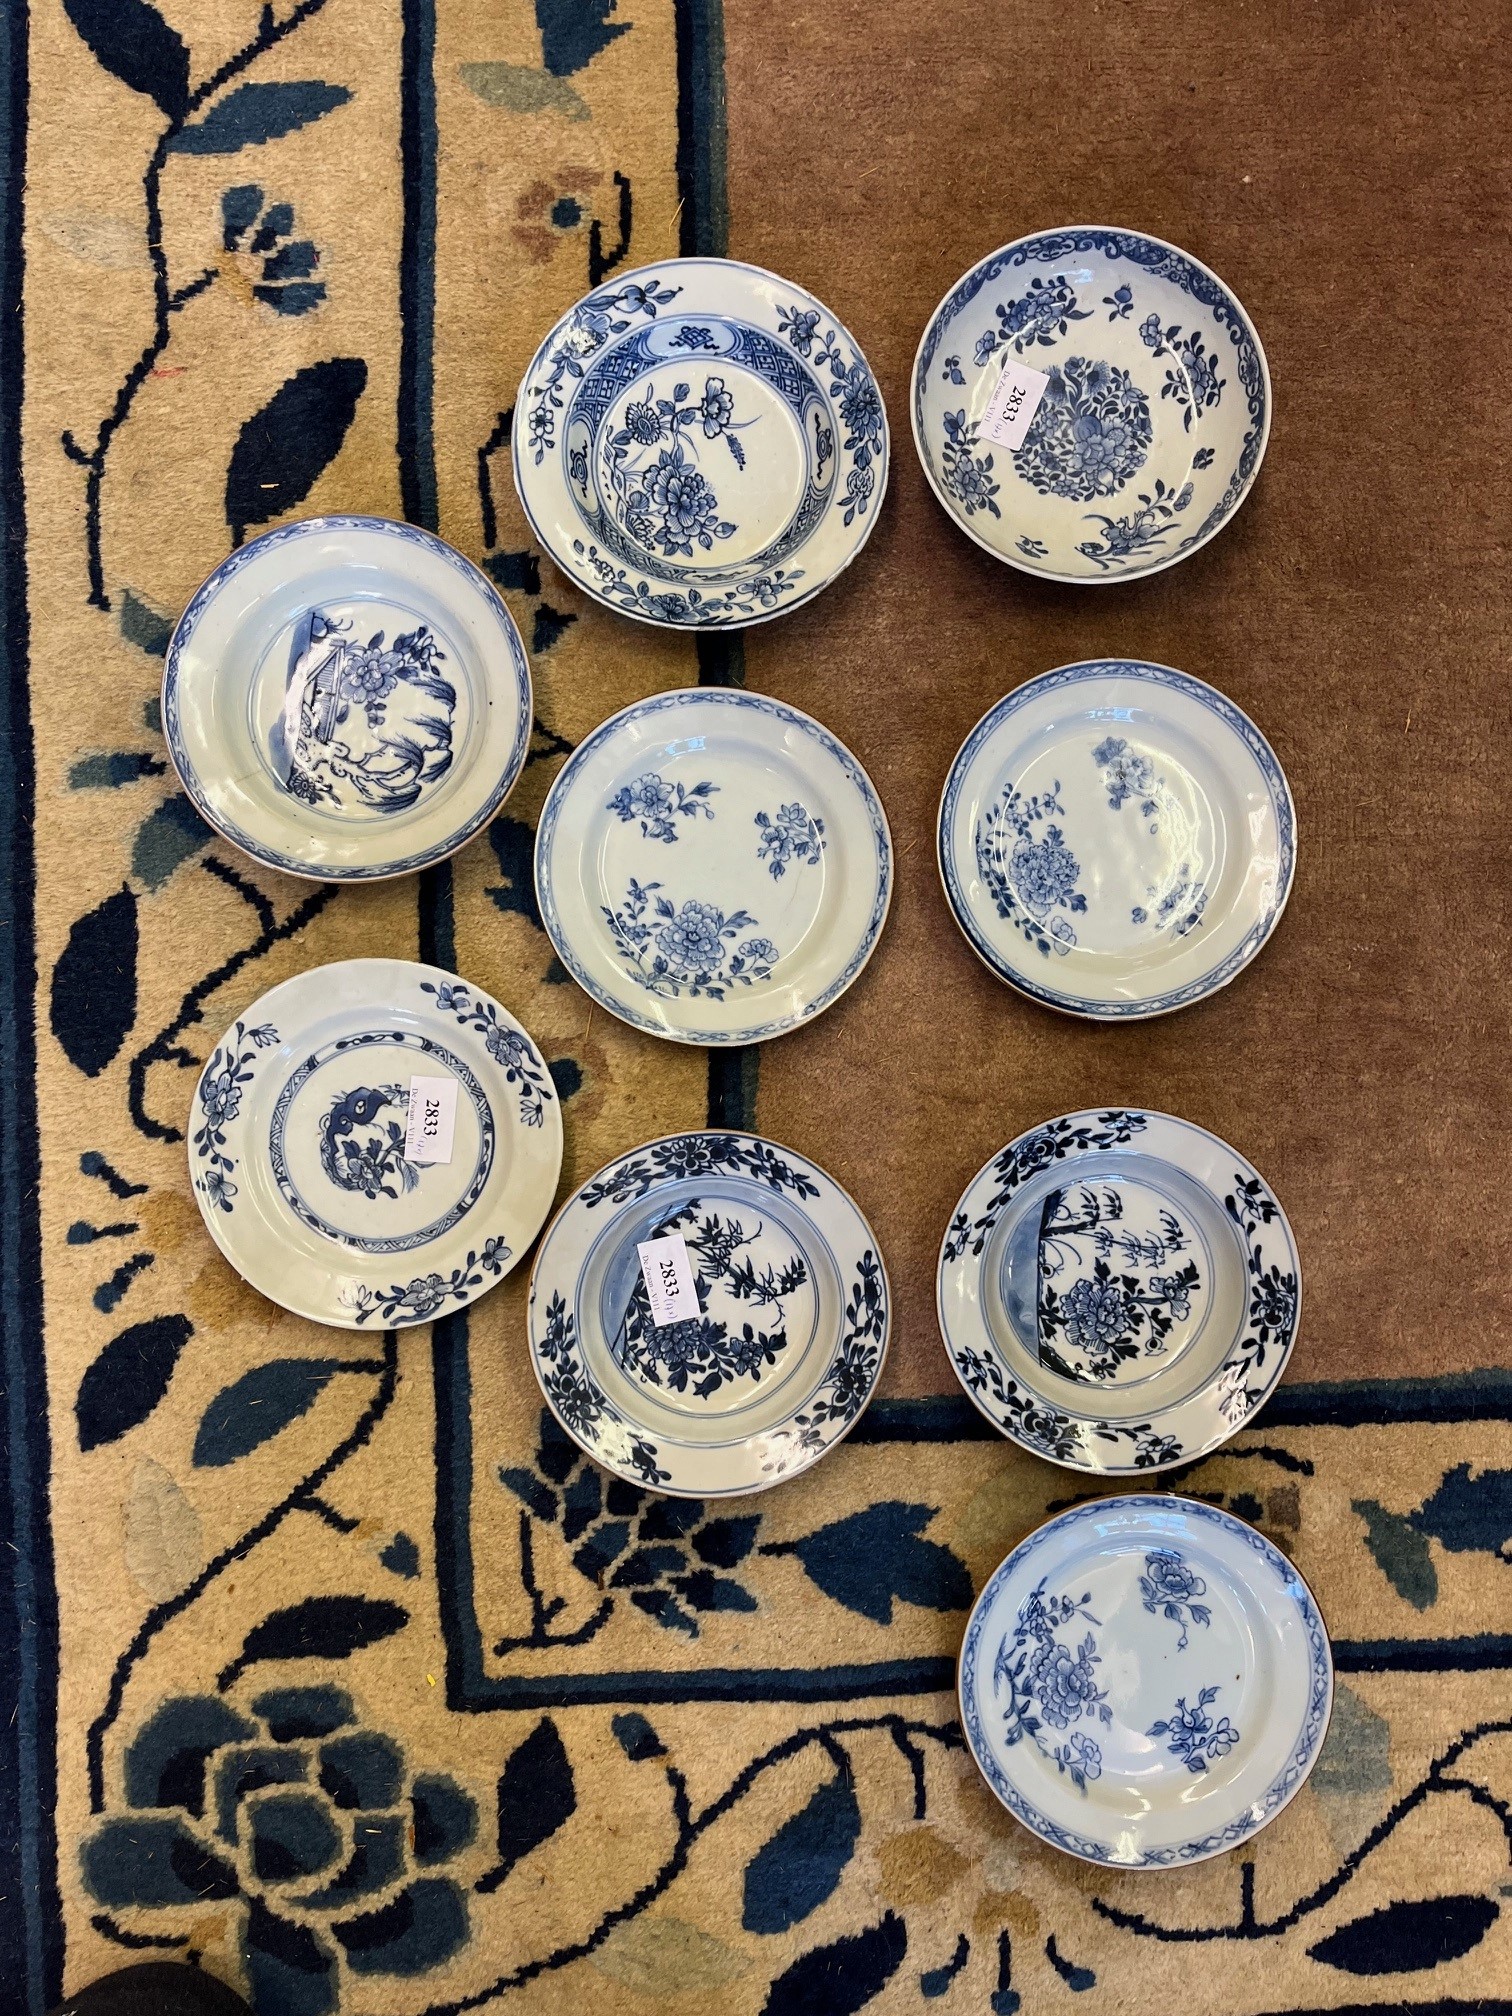 China, a collection of blue and white porcelain plates and saucer dishes, Qianlong period (1736-1795